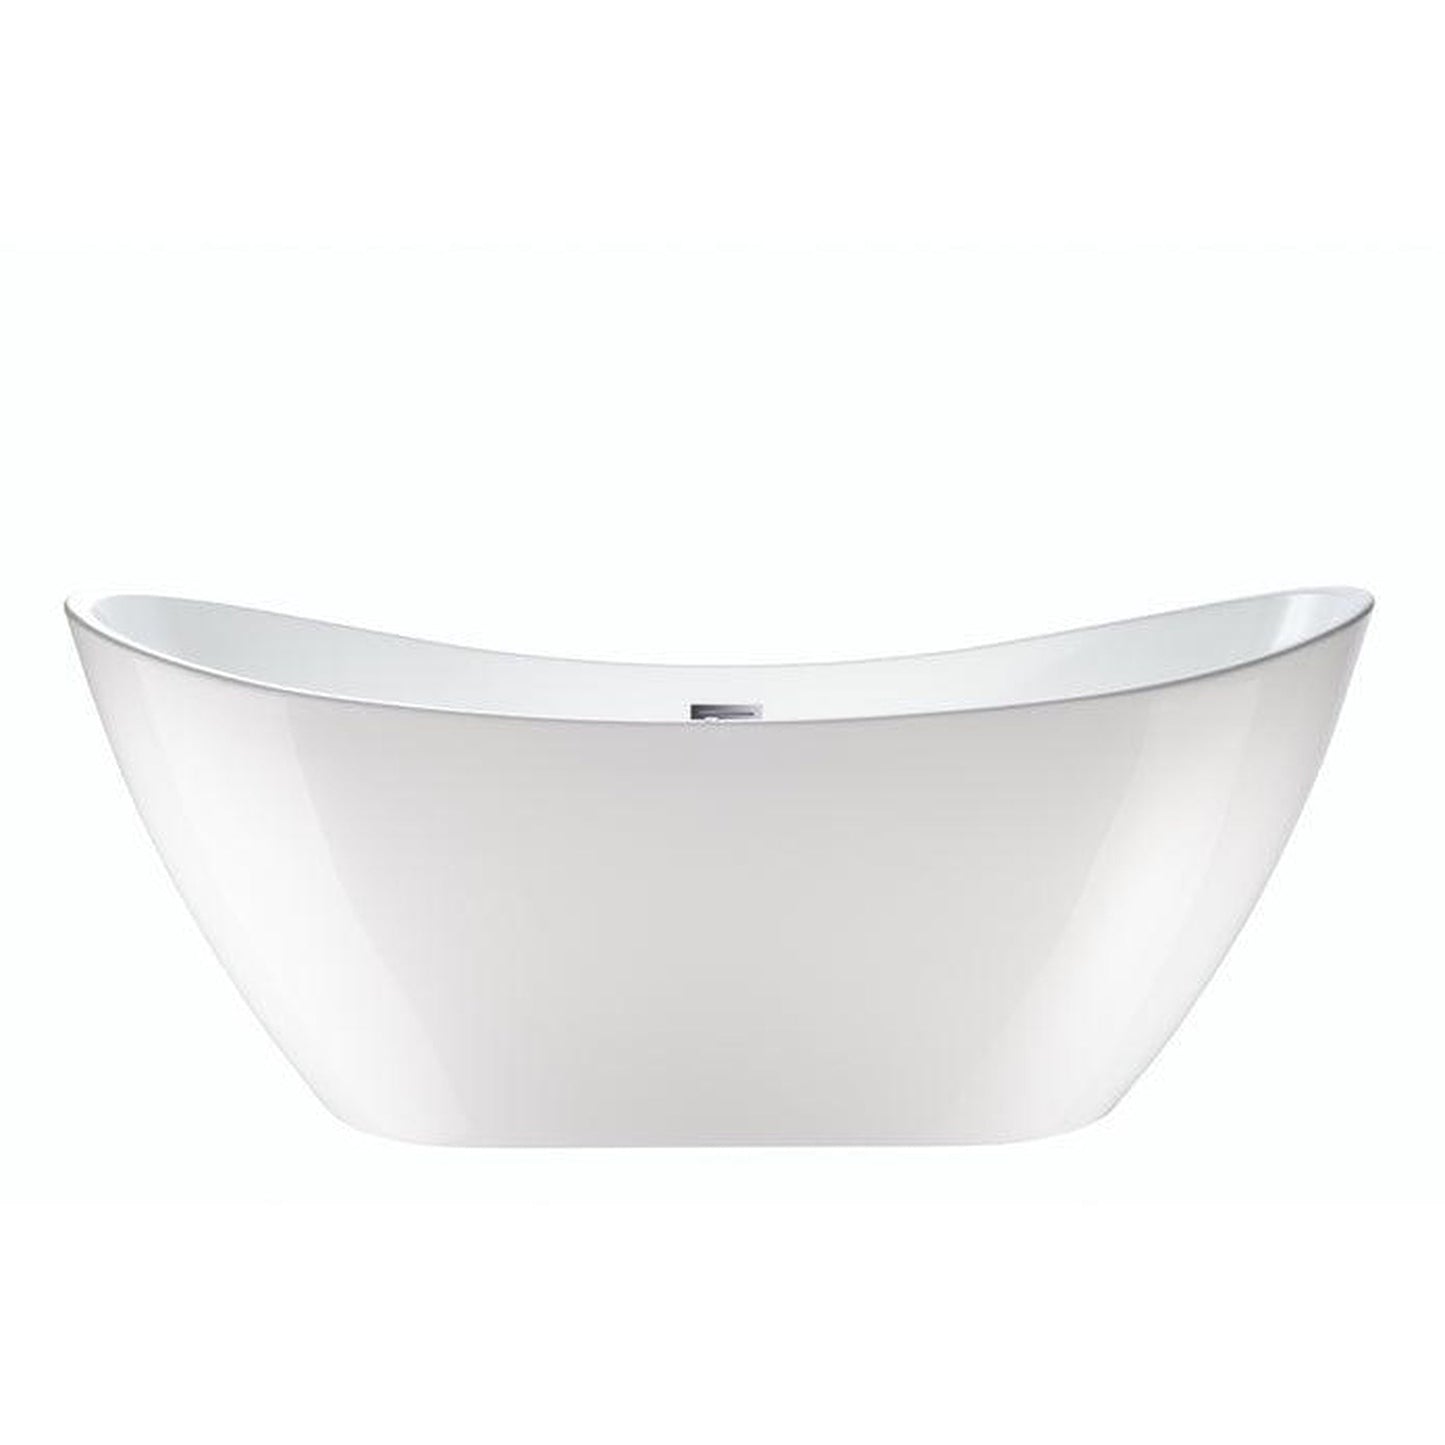 Vanity Art 71" W x 28" H White Acrylic Freestanding Bathtub With Brushed Nickel Pop-up Drain, Slotted Overflow and Flexible Drain Hose